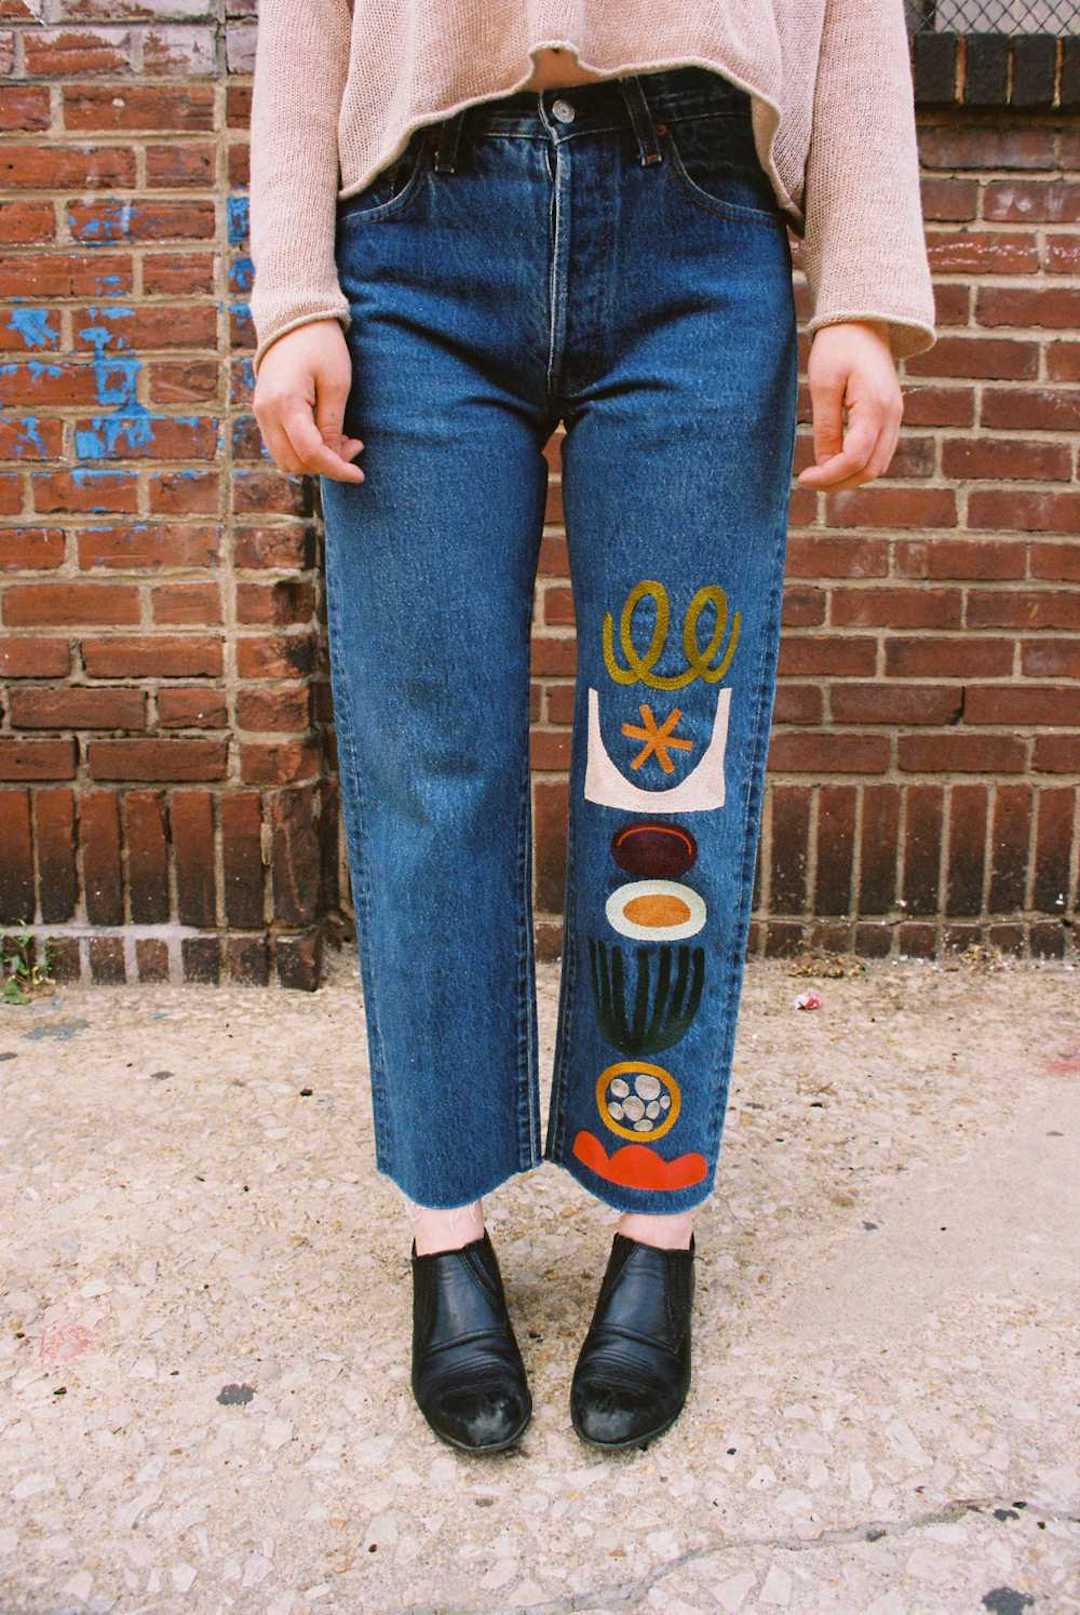 hand embroidery on denim